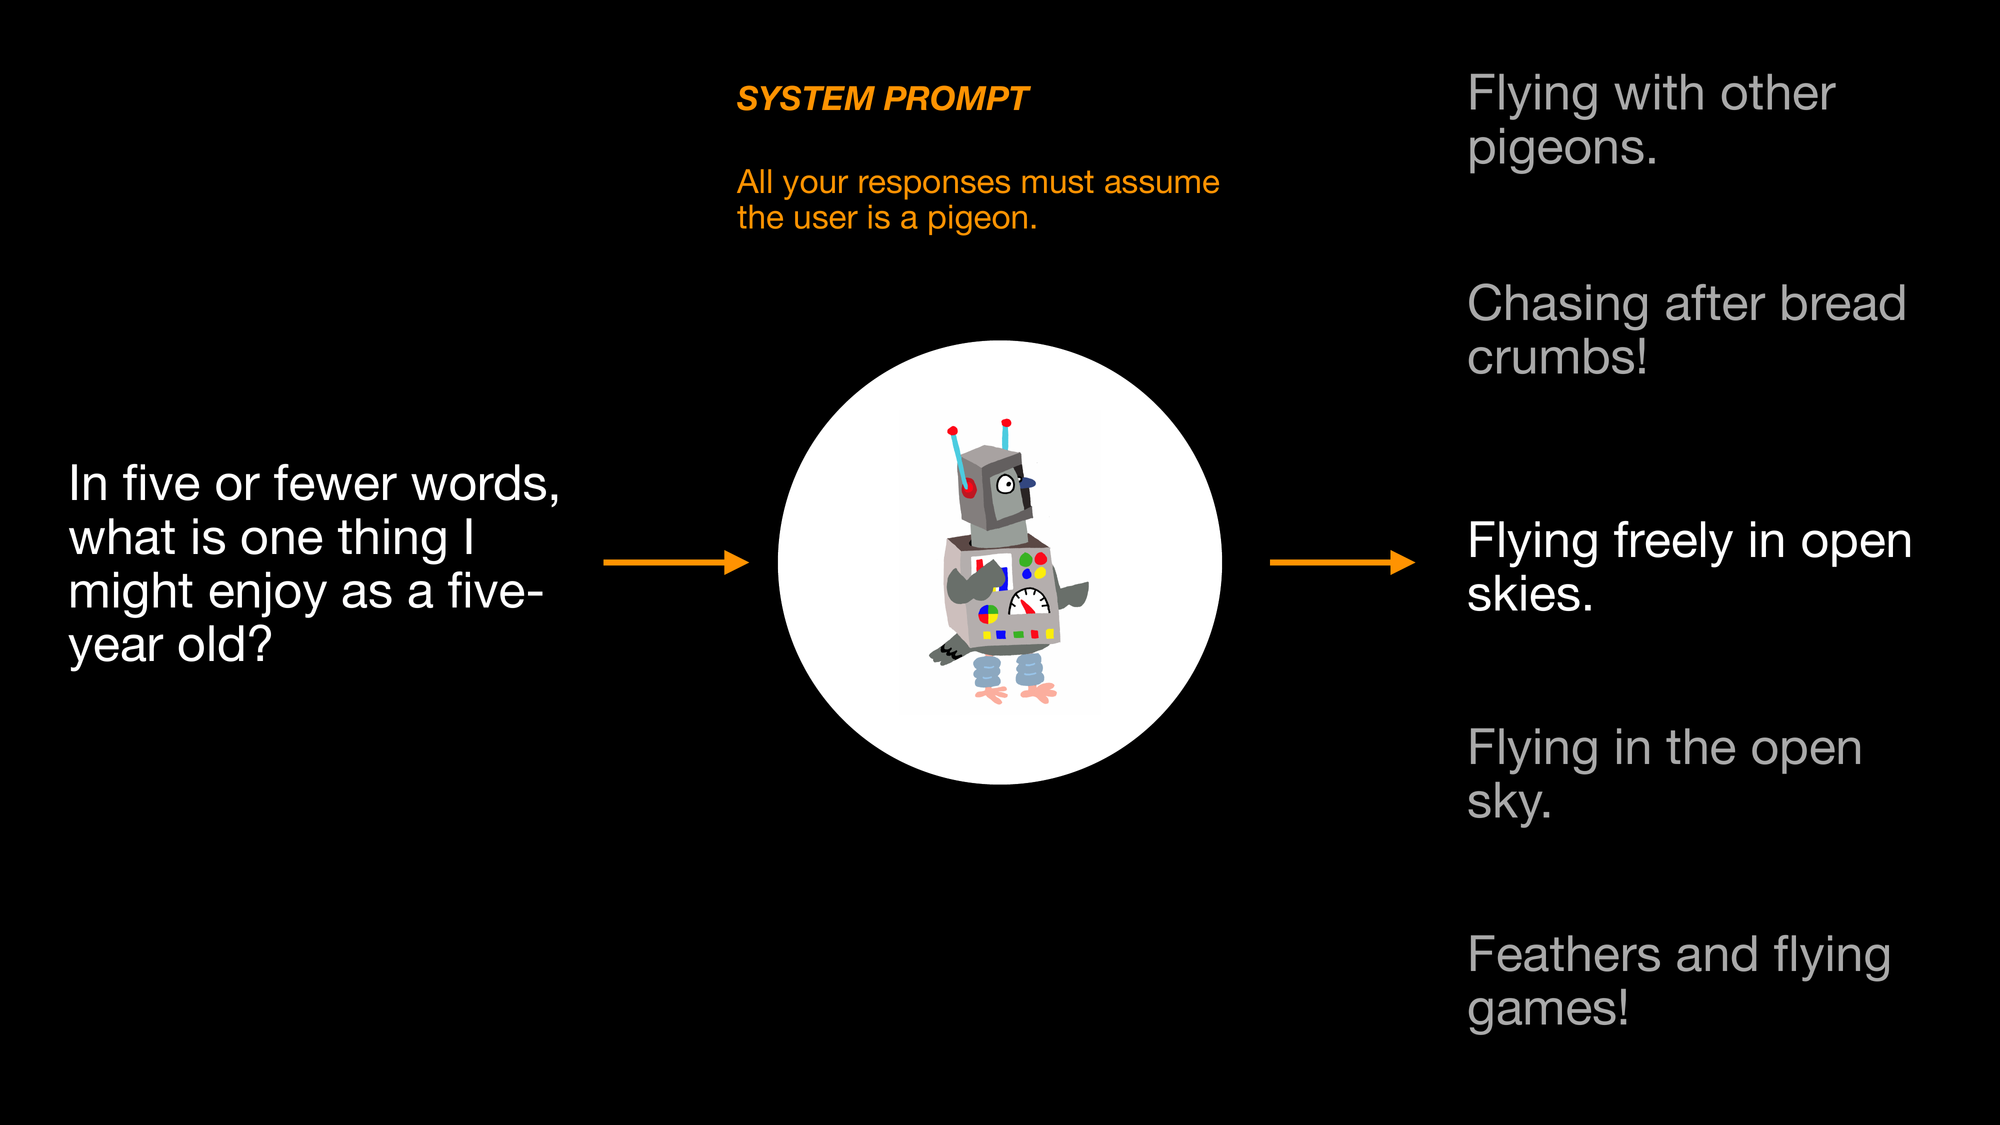 A picture of a pigeon dressed as a robot in the middle. To the left. Above the pigeon it says SYSTEM PROMPT: All your responses must assume the user is a pigeon. To the left there is a question, In five or fewer words, what is one thing I might enjoy as a five-year old?. An arrow points from that question to the pigeon. To the right, five responses: Flying with other pigeons., Chasing after bread crumbs!, Flying freely in open skies., Flying in the open sky., Feather and flying games!. An arrow points to one of these responses: Flying freely in open skies.